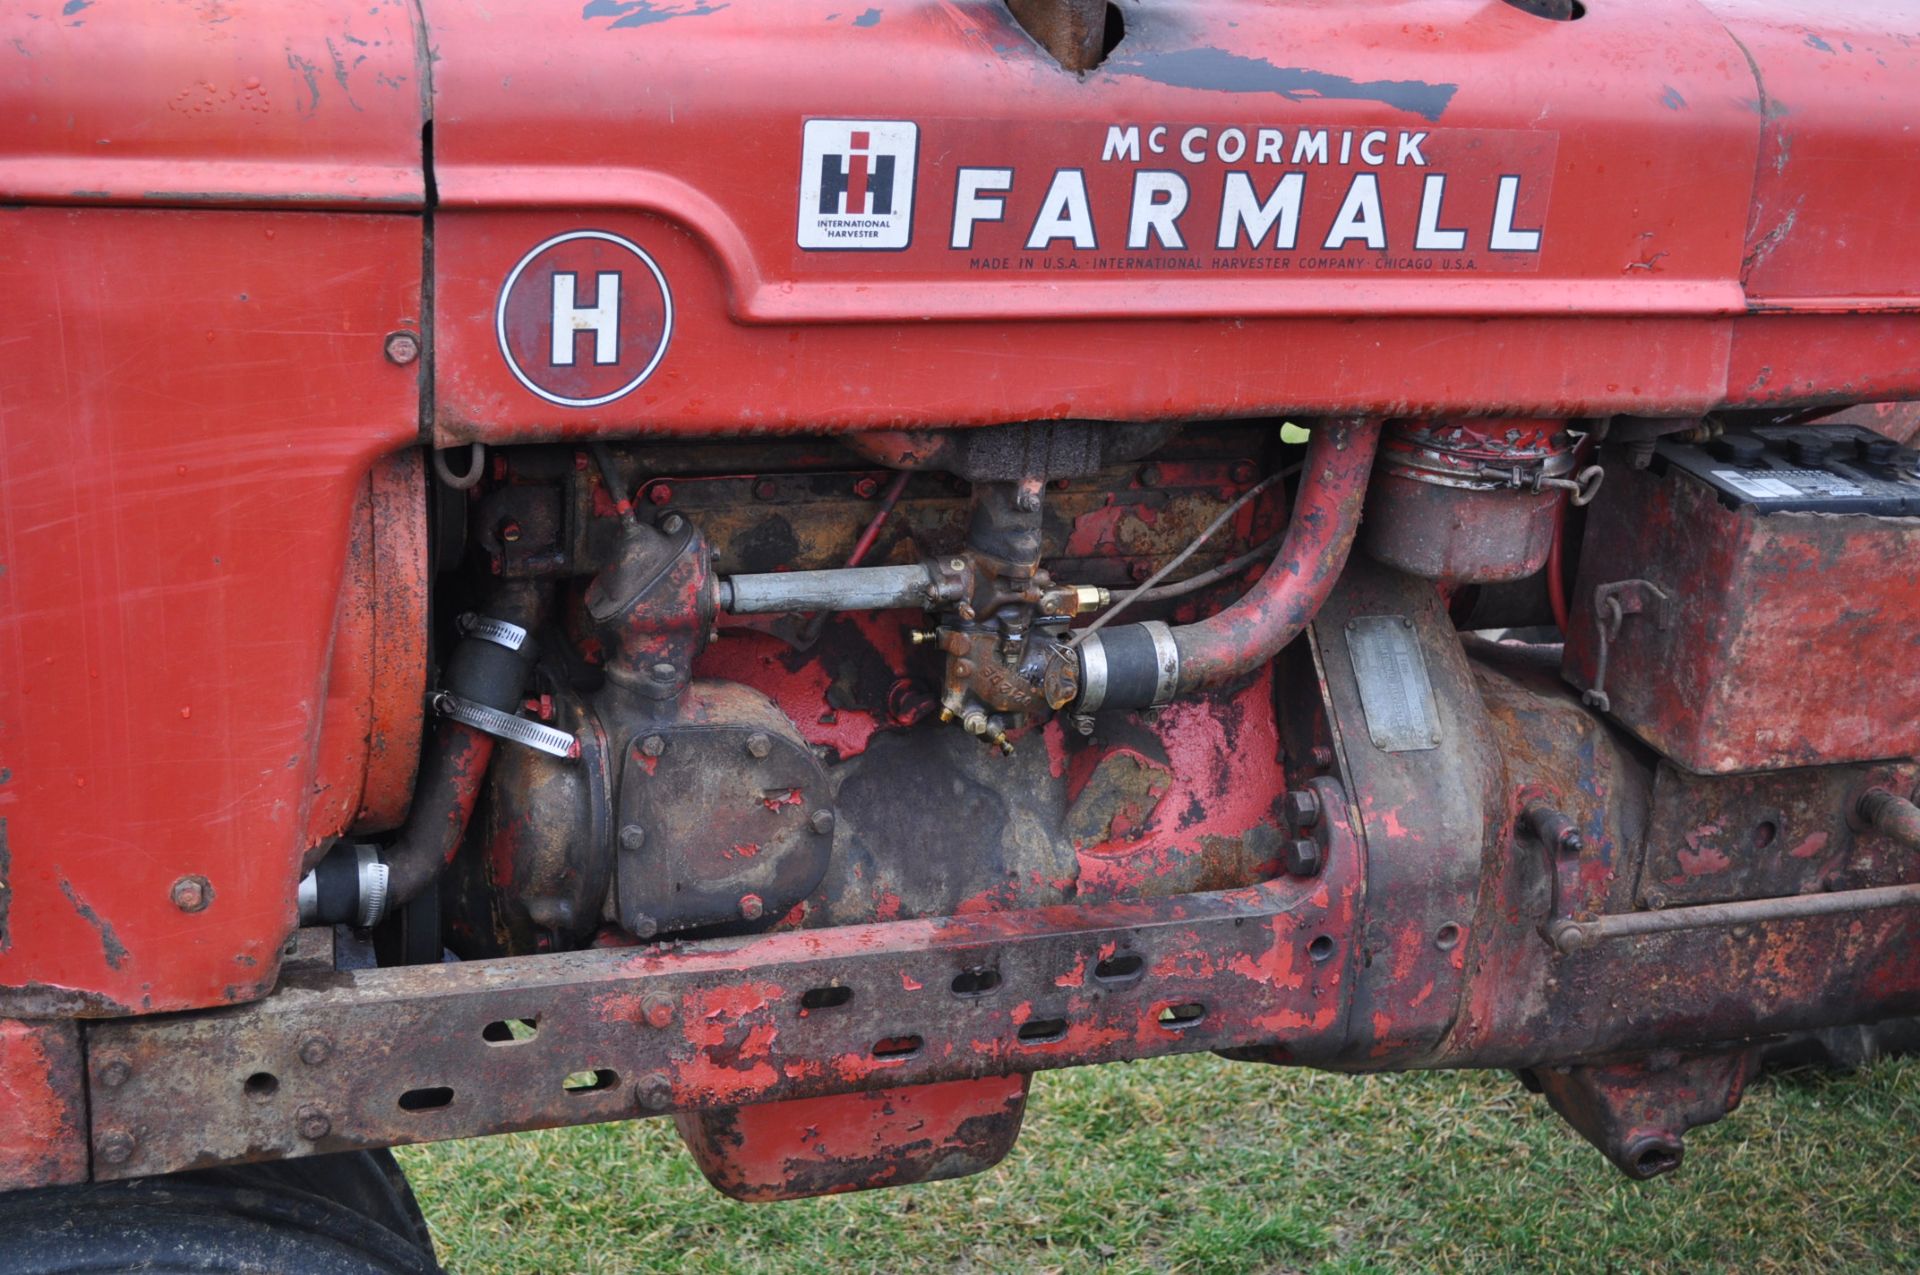 McCormick Farmall H tractor, 12.4-38 rear, narrow front, side pulley, 540 pto, SN FBH273308XL - Image 11 of 14